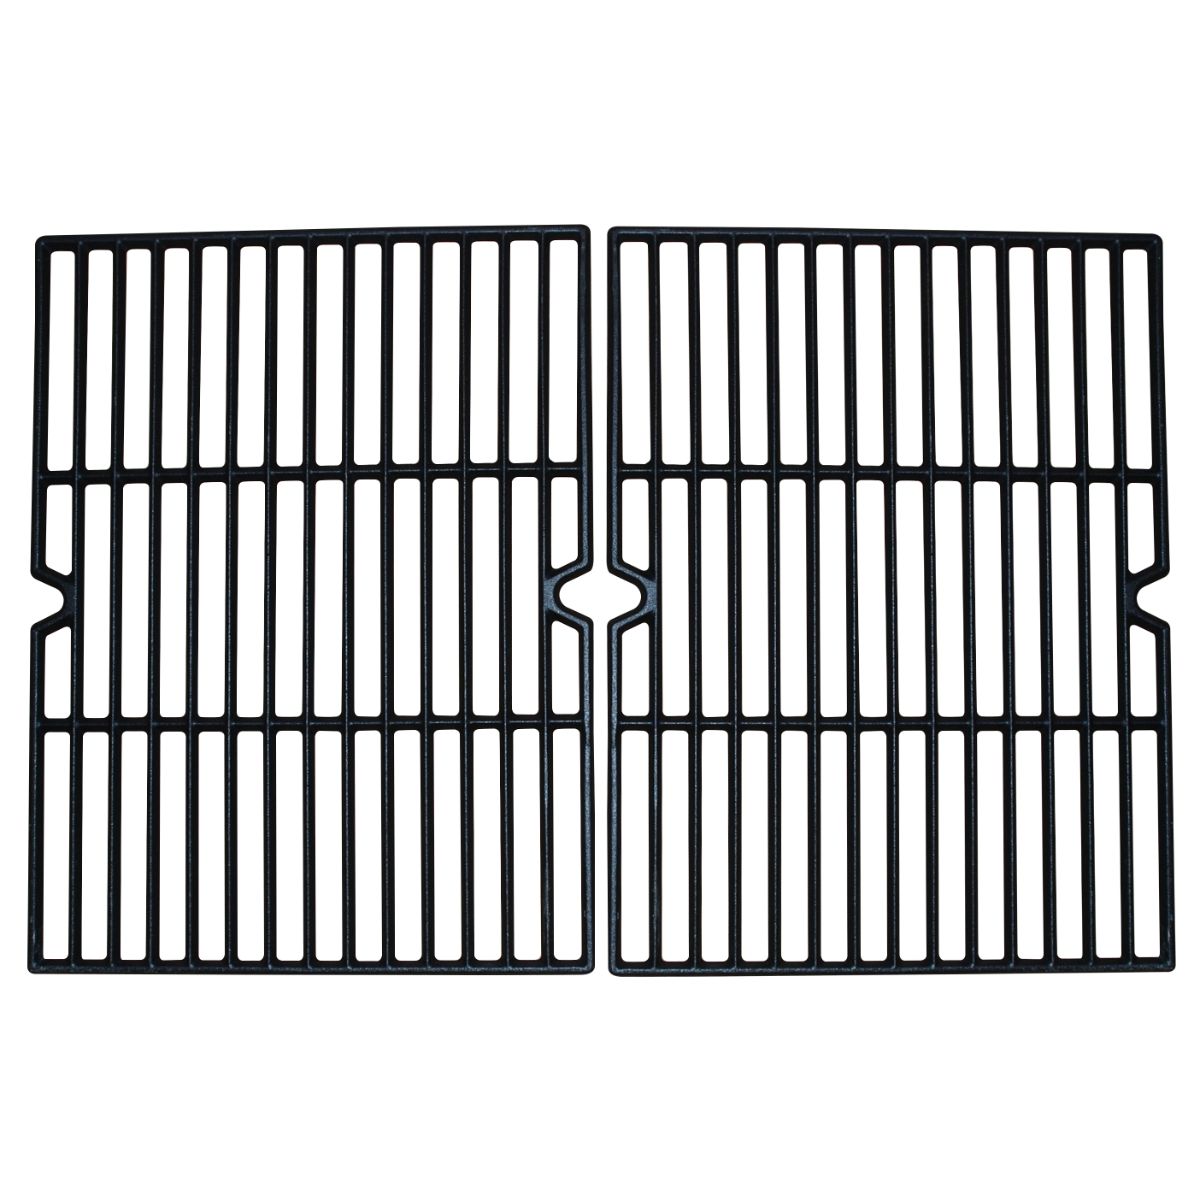 Matte cast iron cooking grid for Charbroil, Hamilton Beach, Kenmore, Permasteel brand gas grills